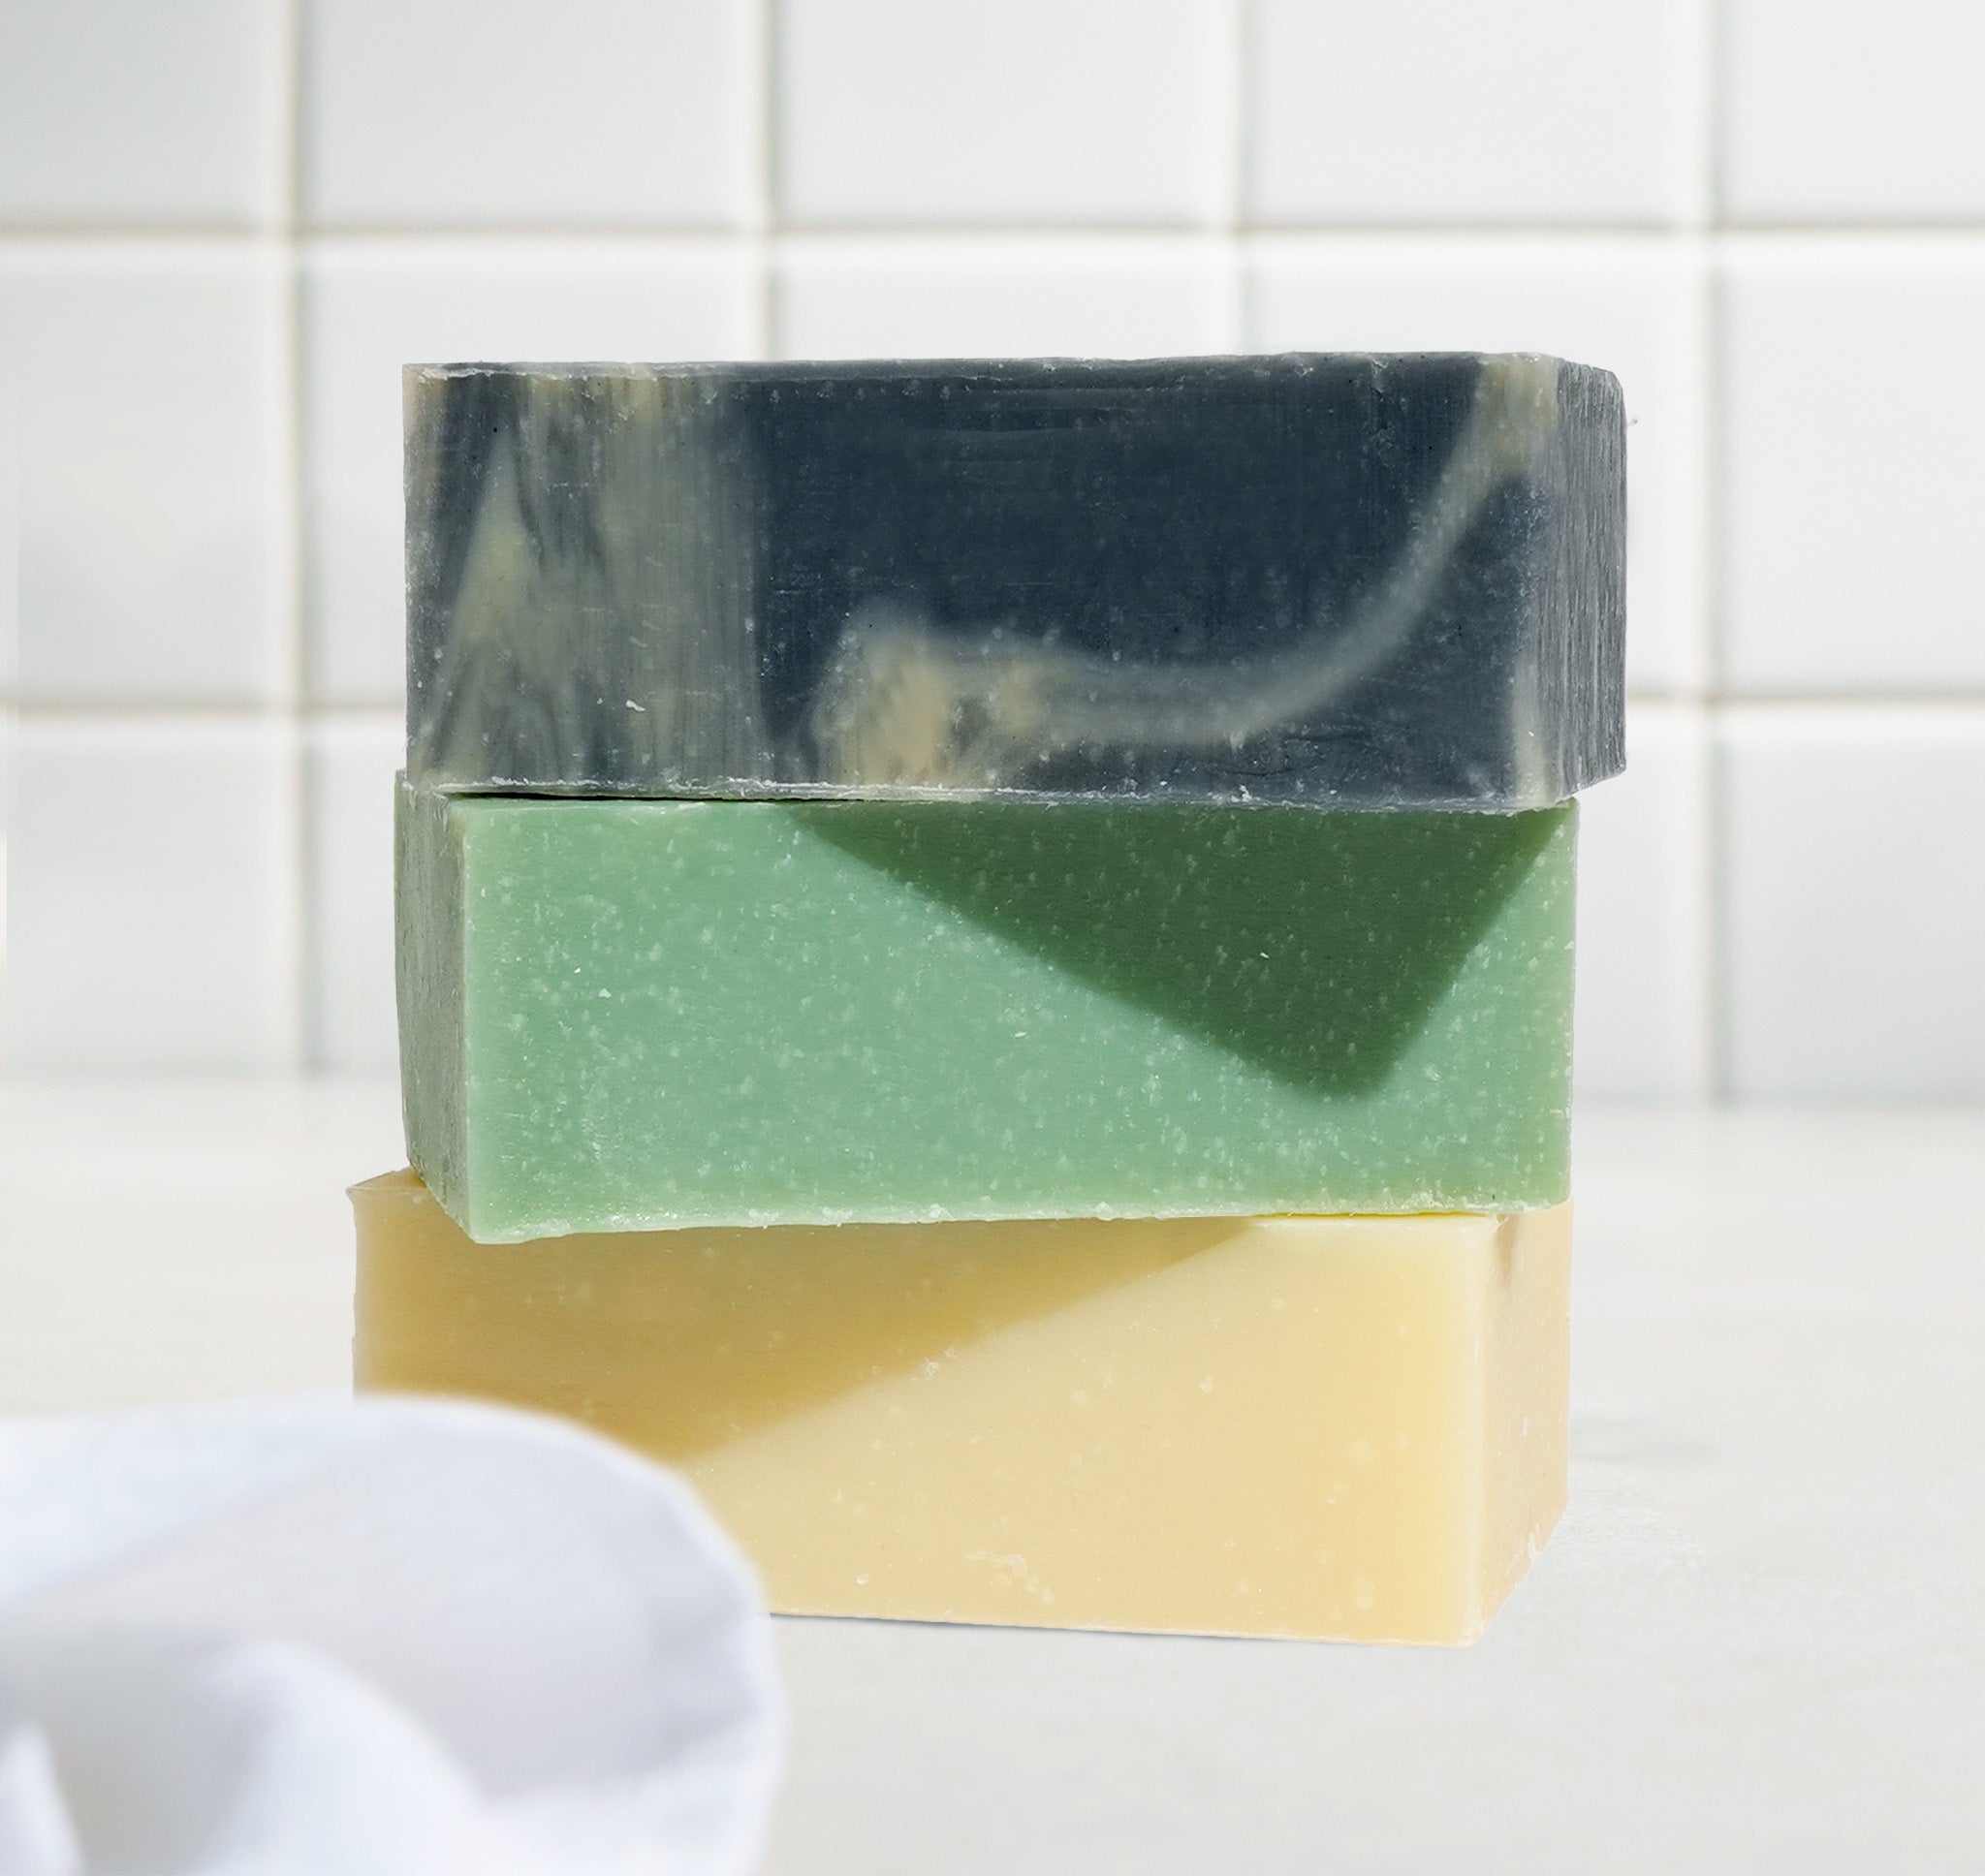 The Fresh & Clean Natural Soap Variety Set